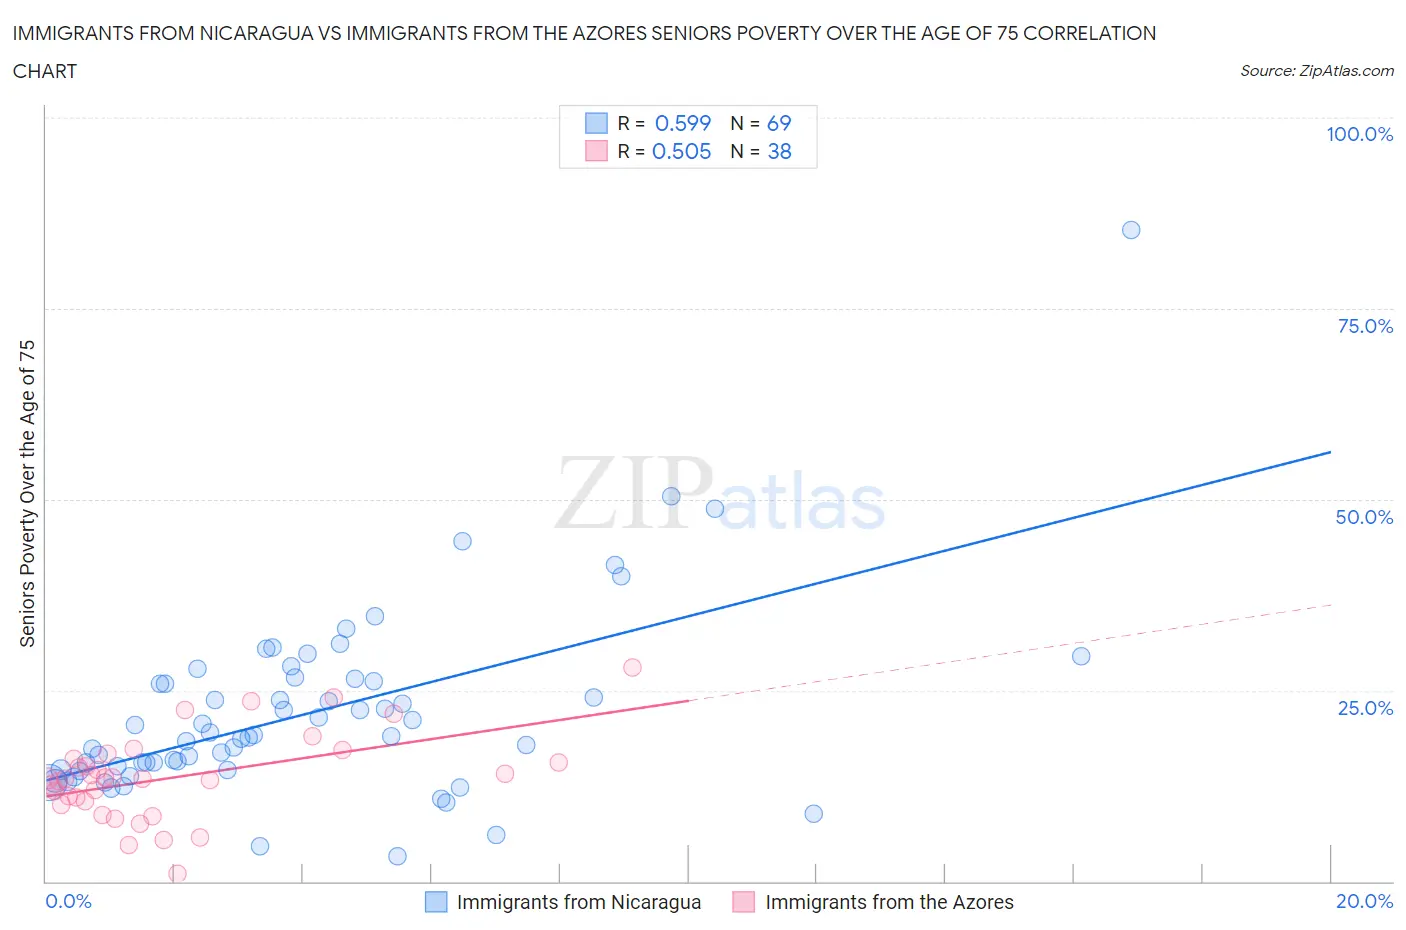 Immigrants from Nicaragua vs Immigrants from the Azores Seniors Poverty Over the Age of 75